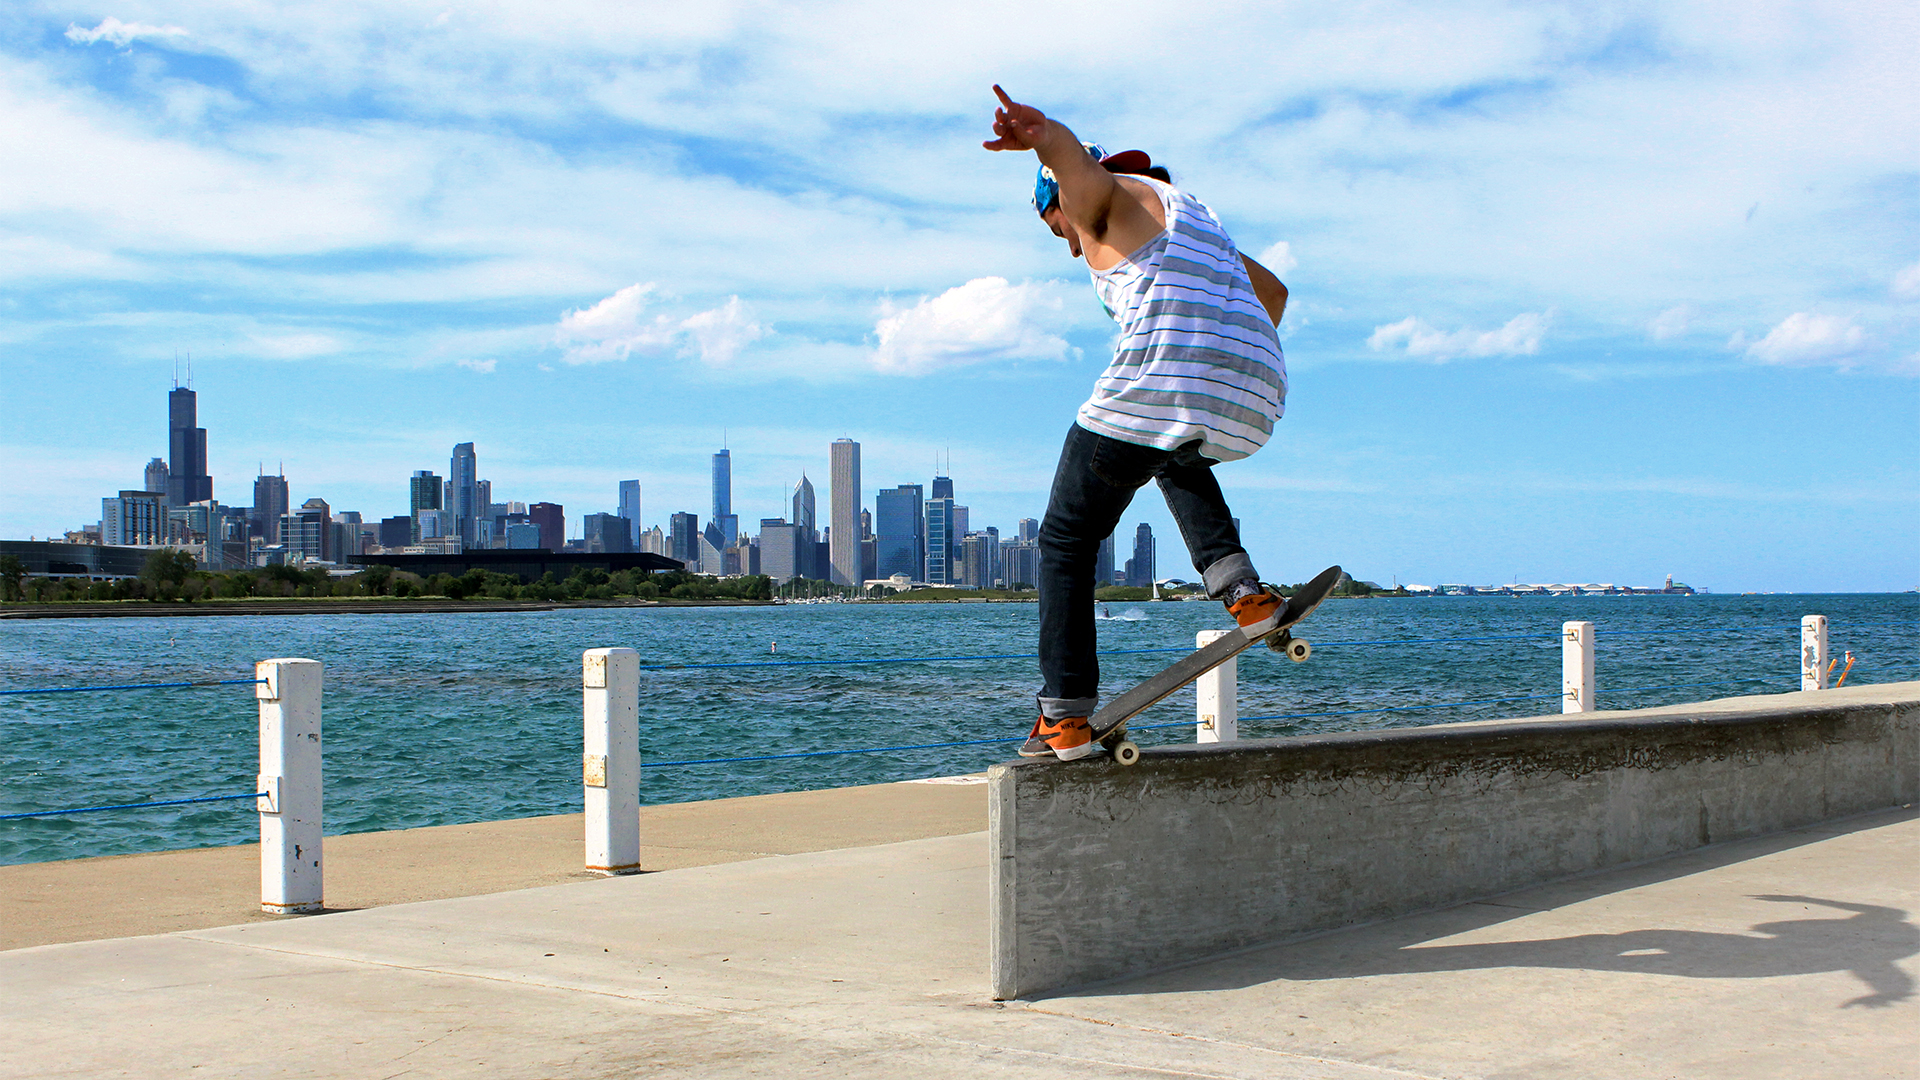 Team rider, Gabe Barajas, grinding a ledge in Chicago, Illinois